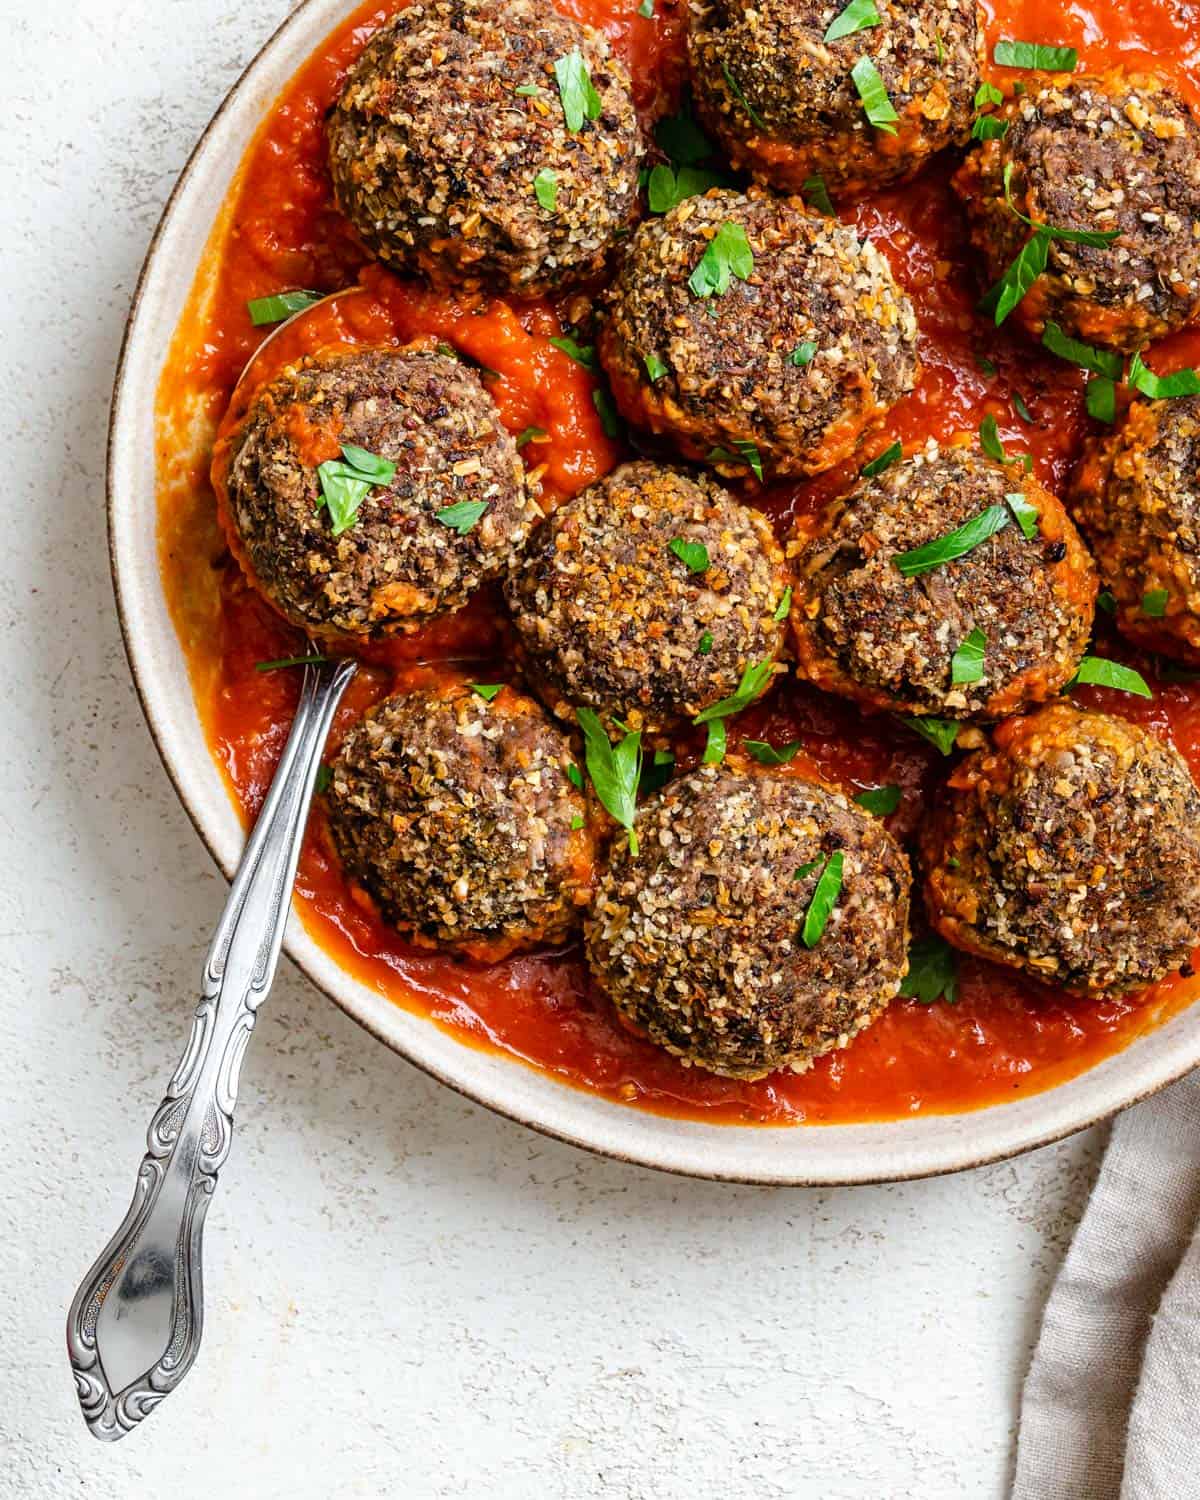 completed Easy Black Bean Meatballs spread out on plate or marinara against a white background